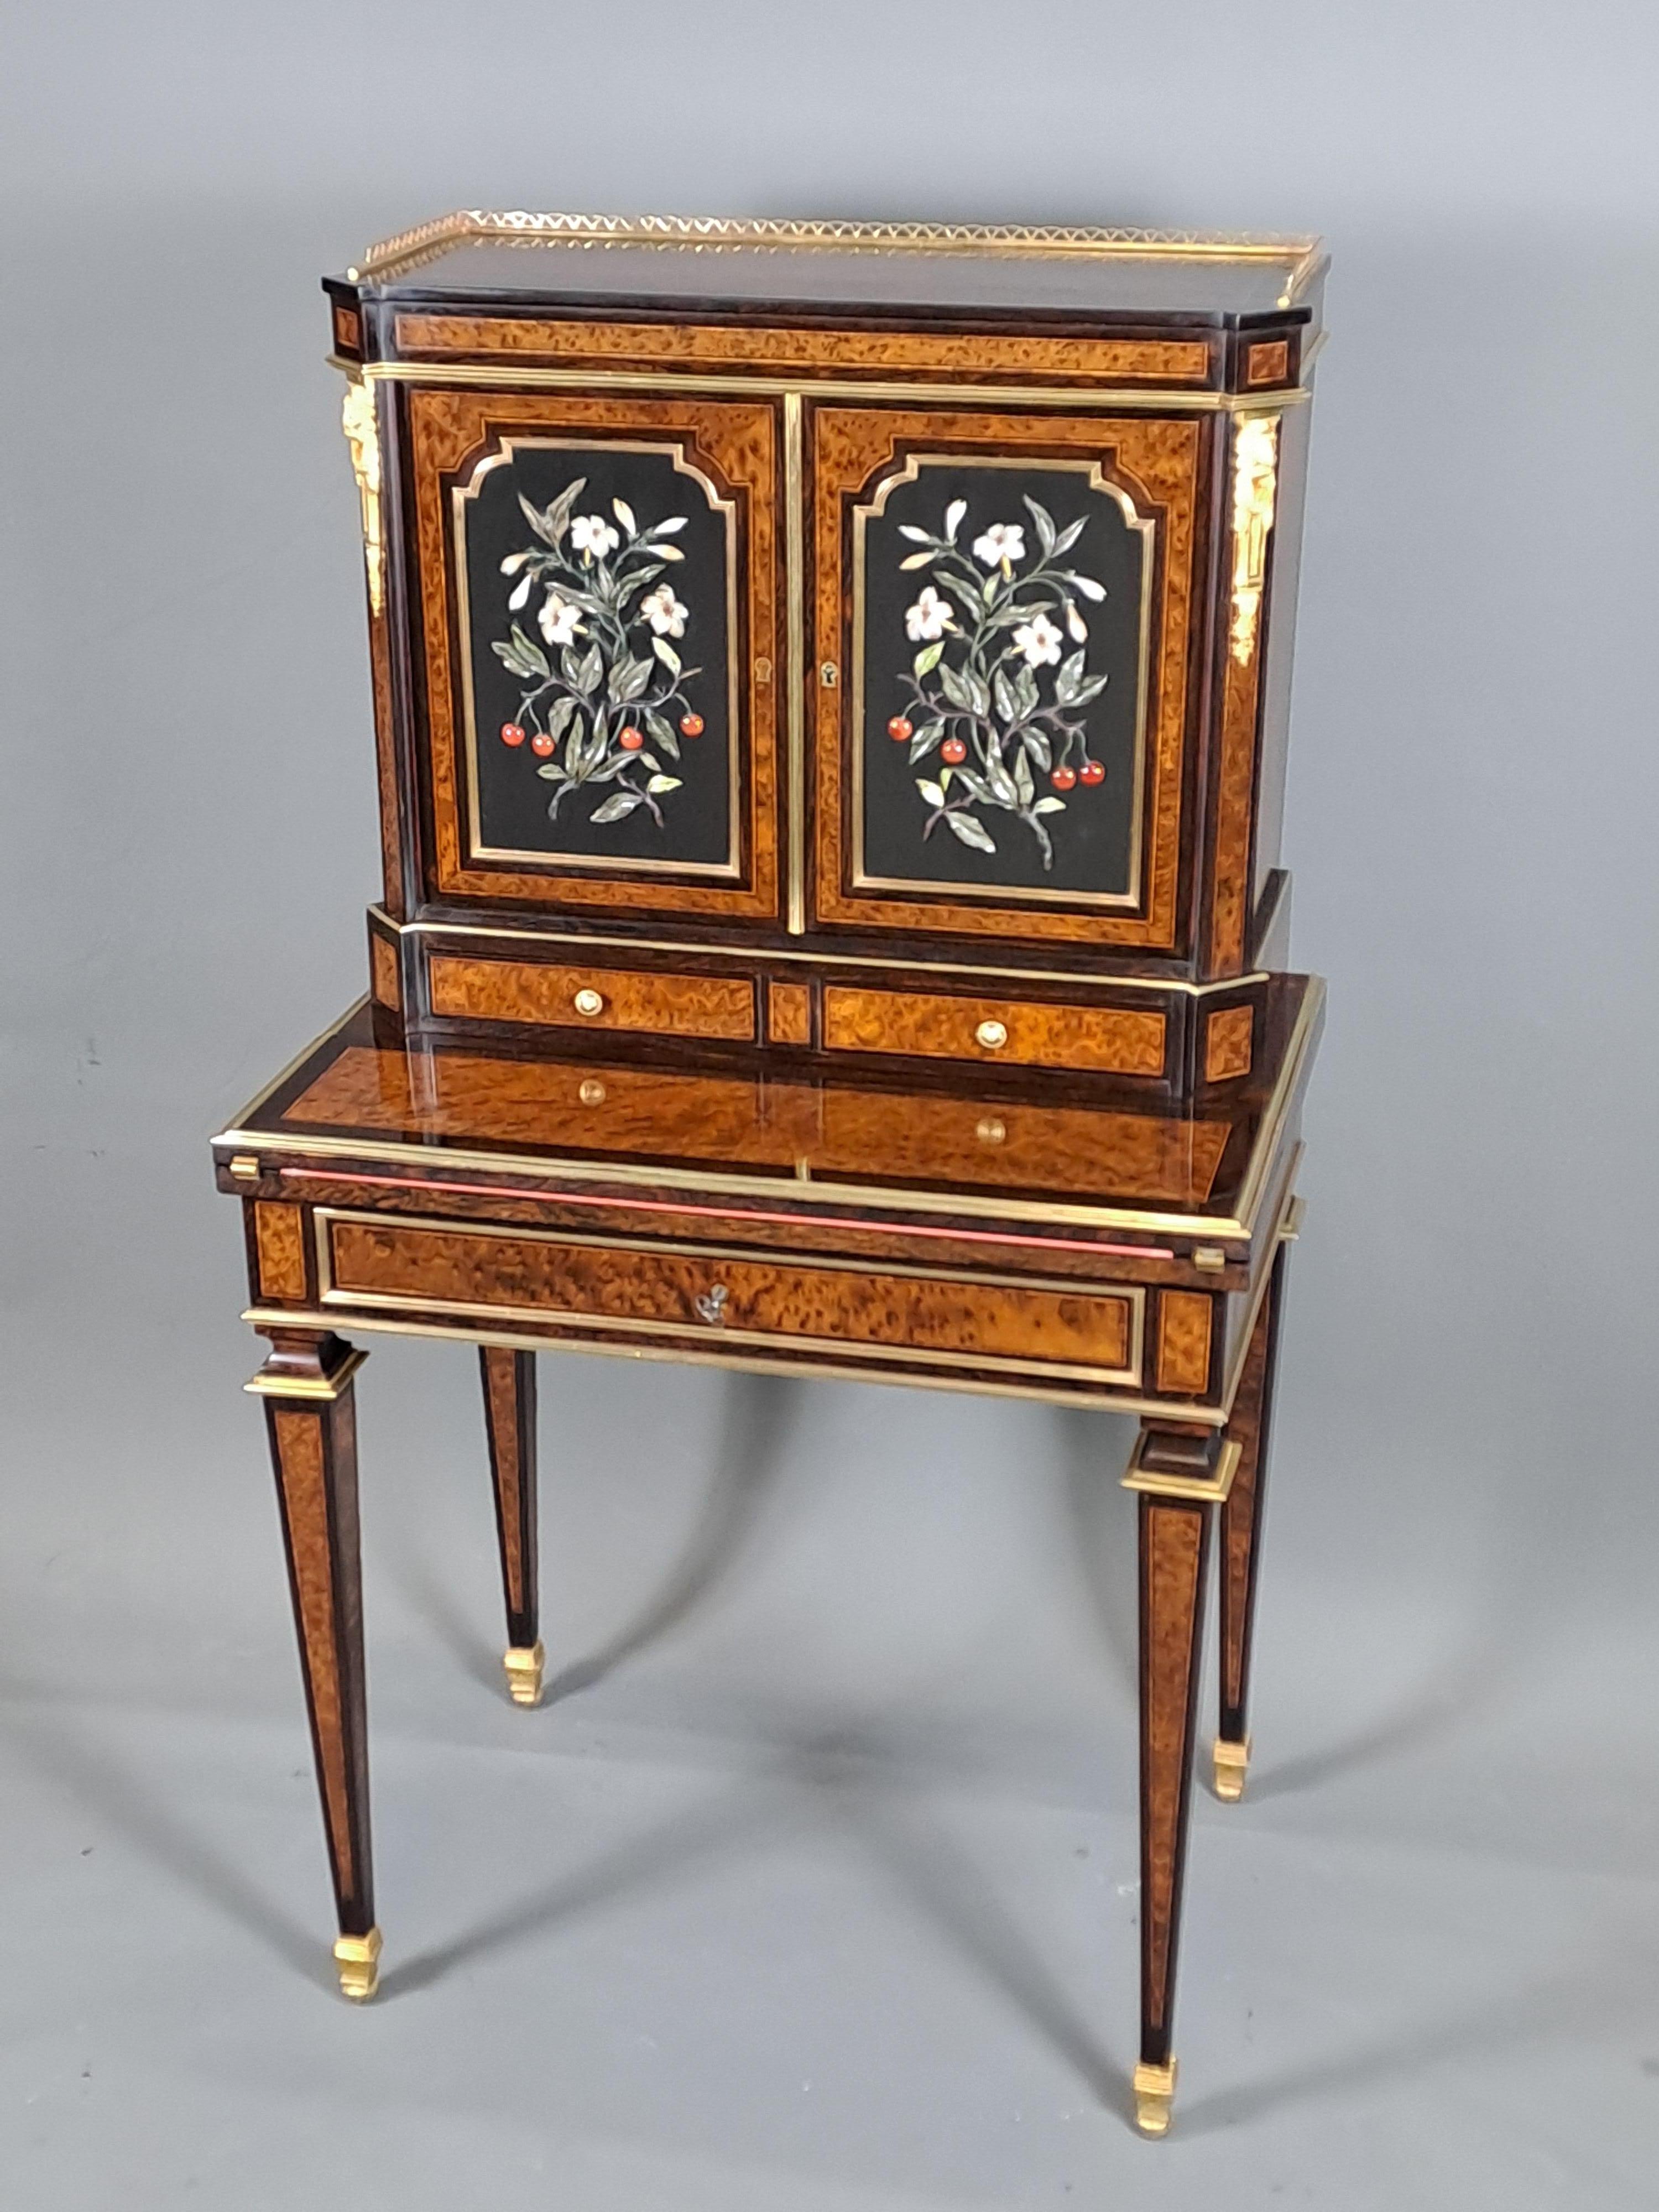 Louis XVI Bonheur Du Jour In Amboyna Burl Marquetry And Hard Stone Panels For Sale